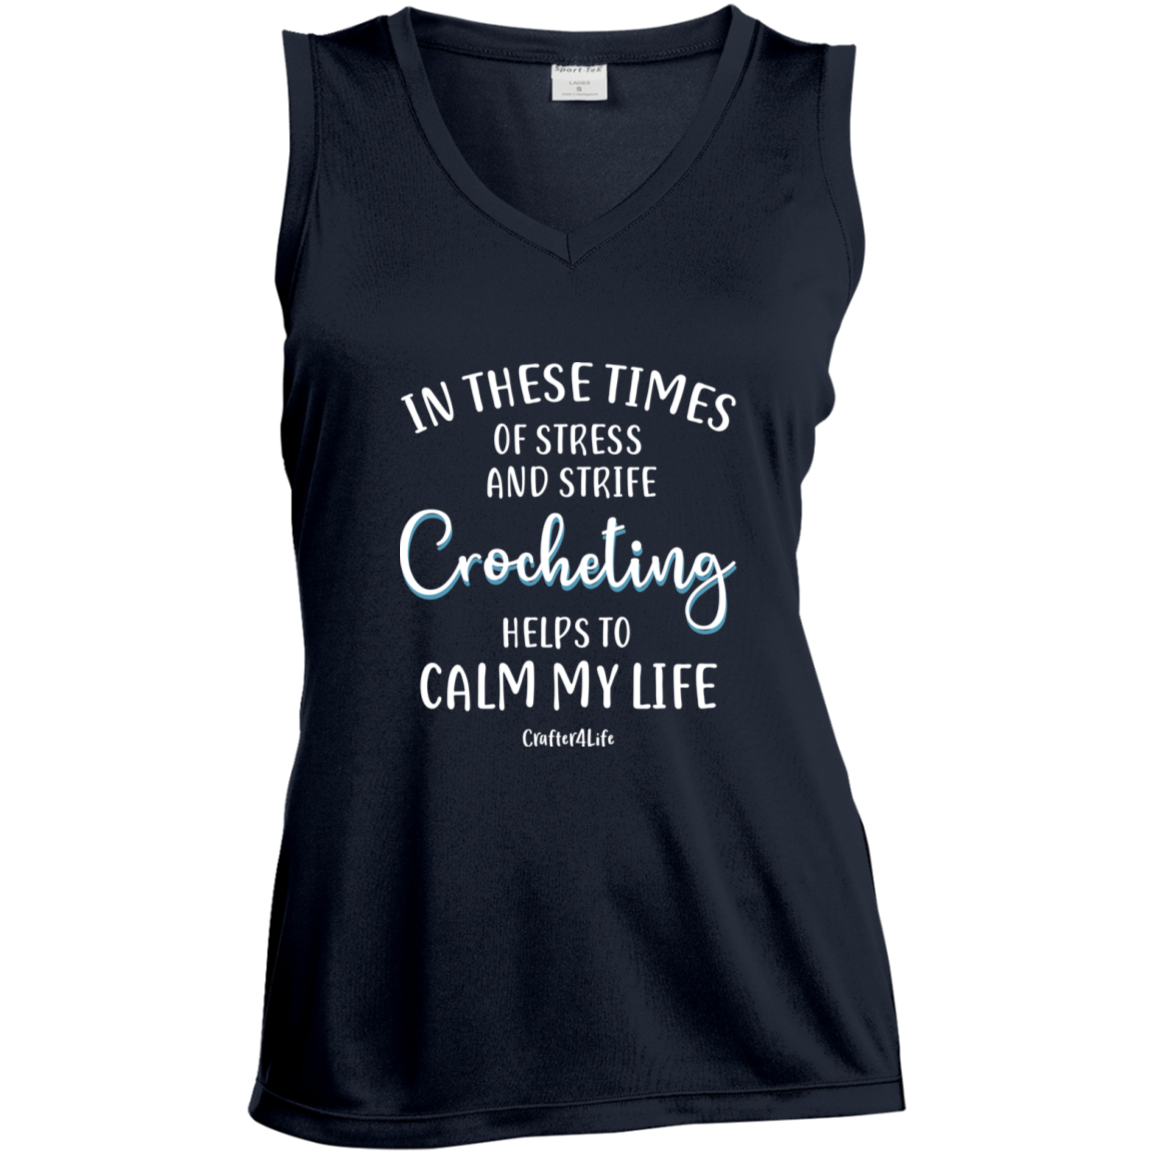 Crocheting Helps to Calm My Life Ladies' Sleeveless Moisture Absorbing V-Neck